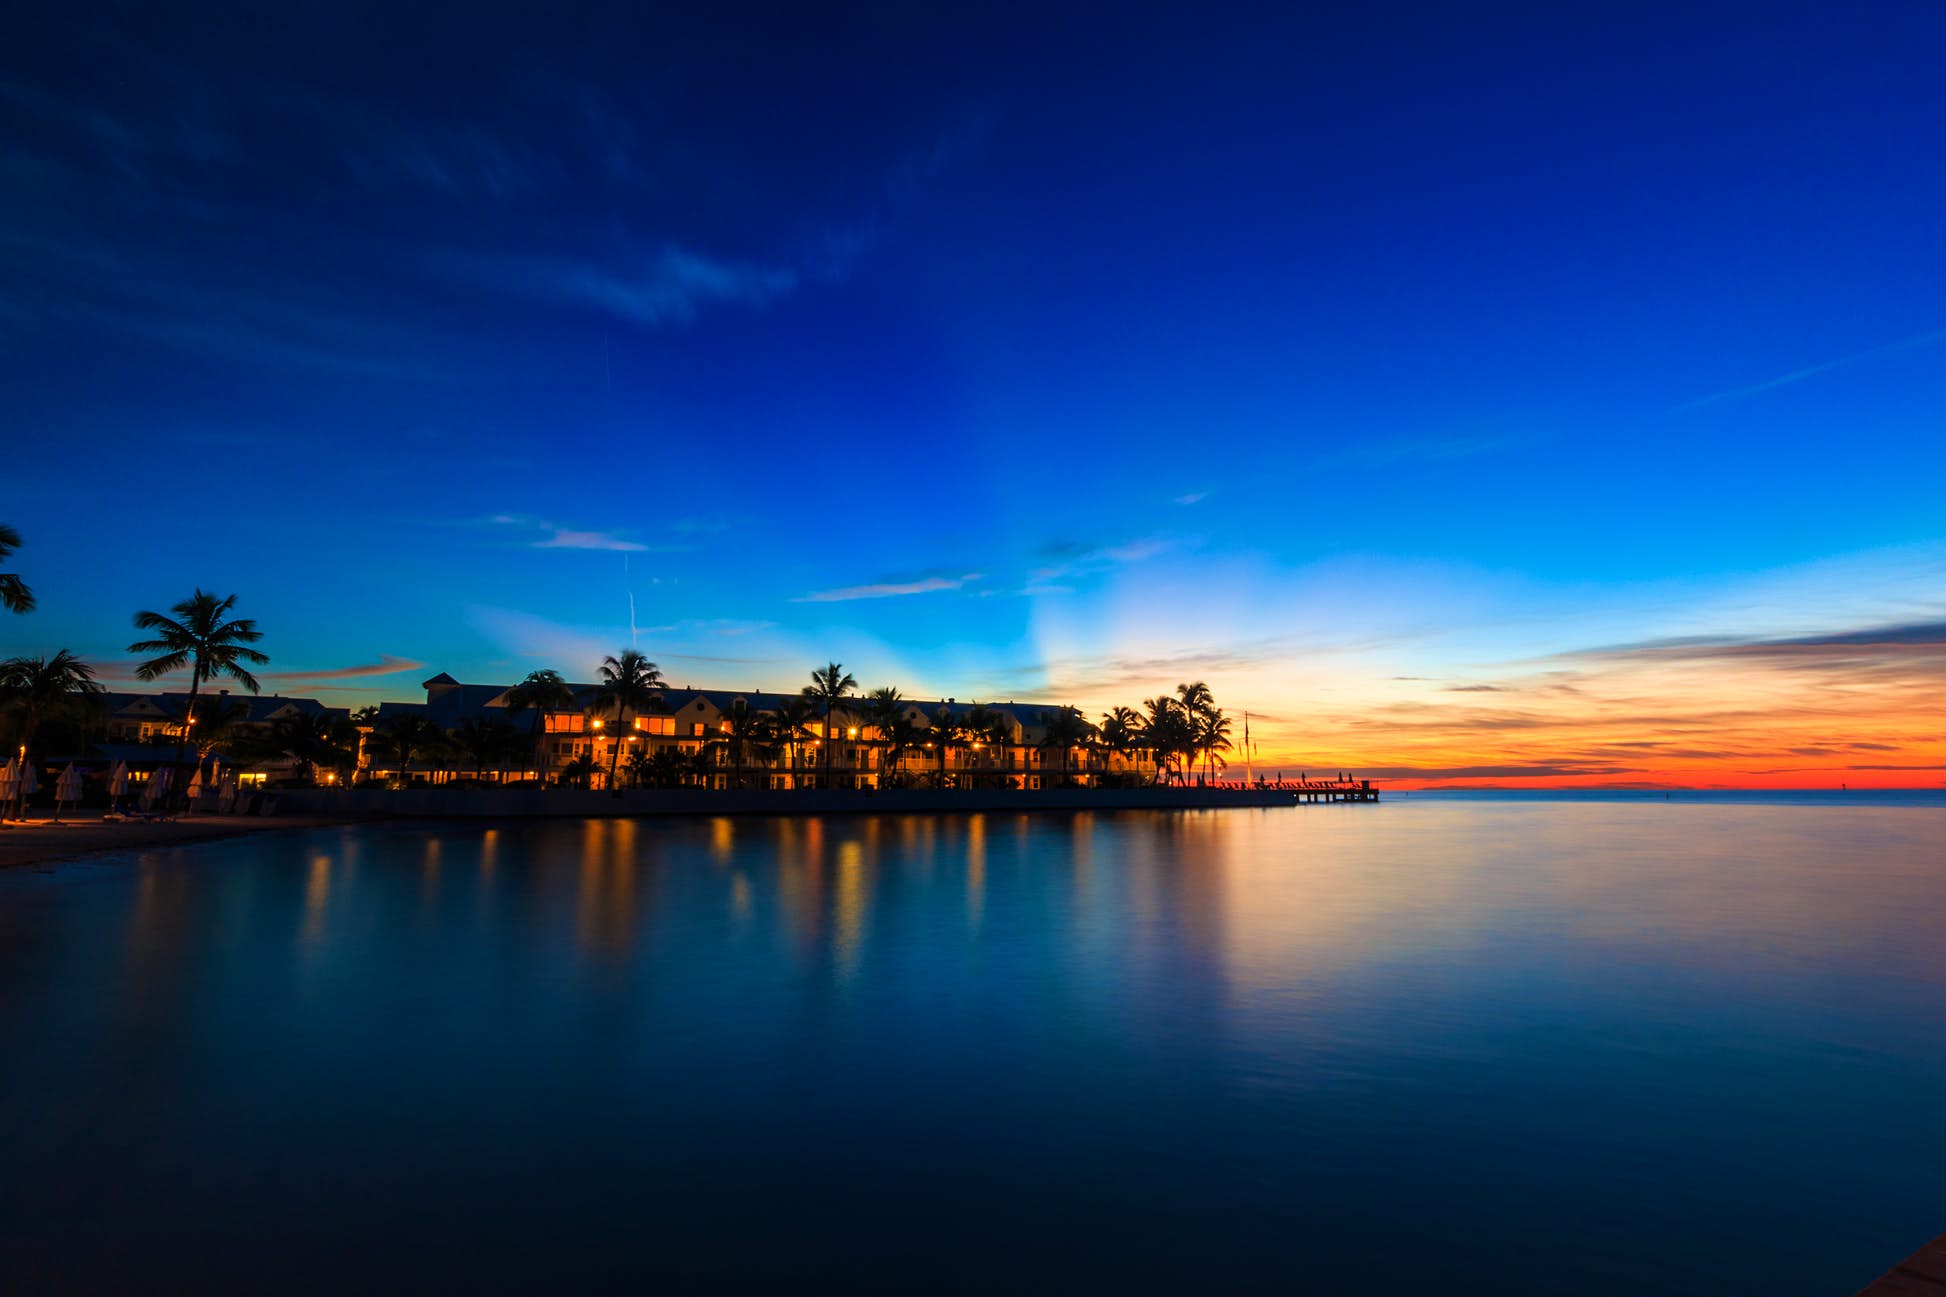 Many hotels have reopened in the Keys © Renato Pessanha / 500px